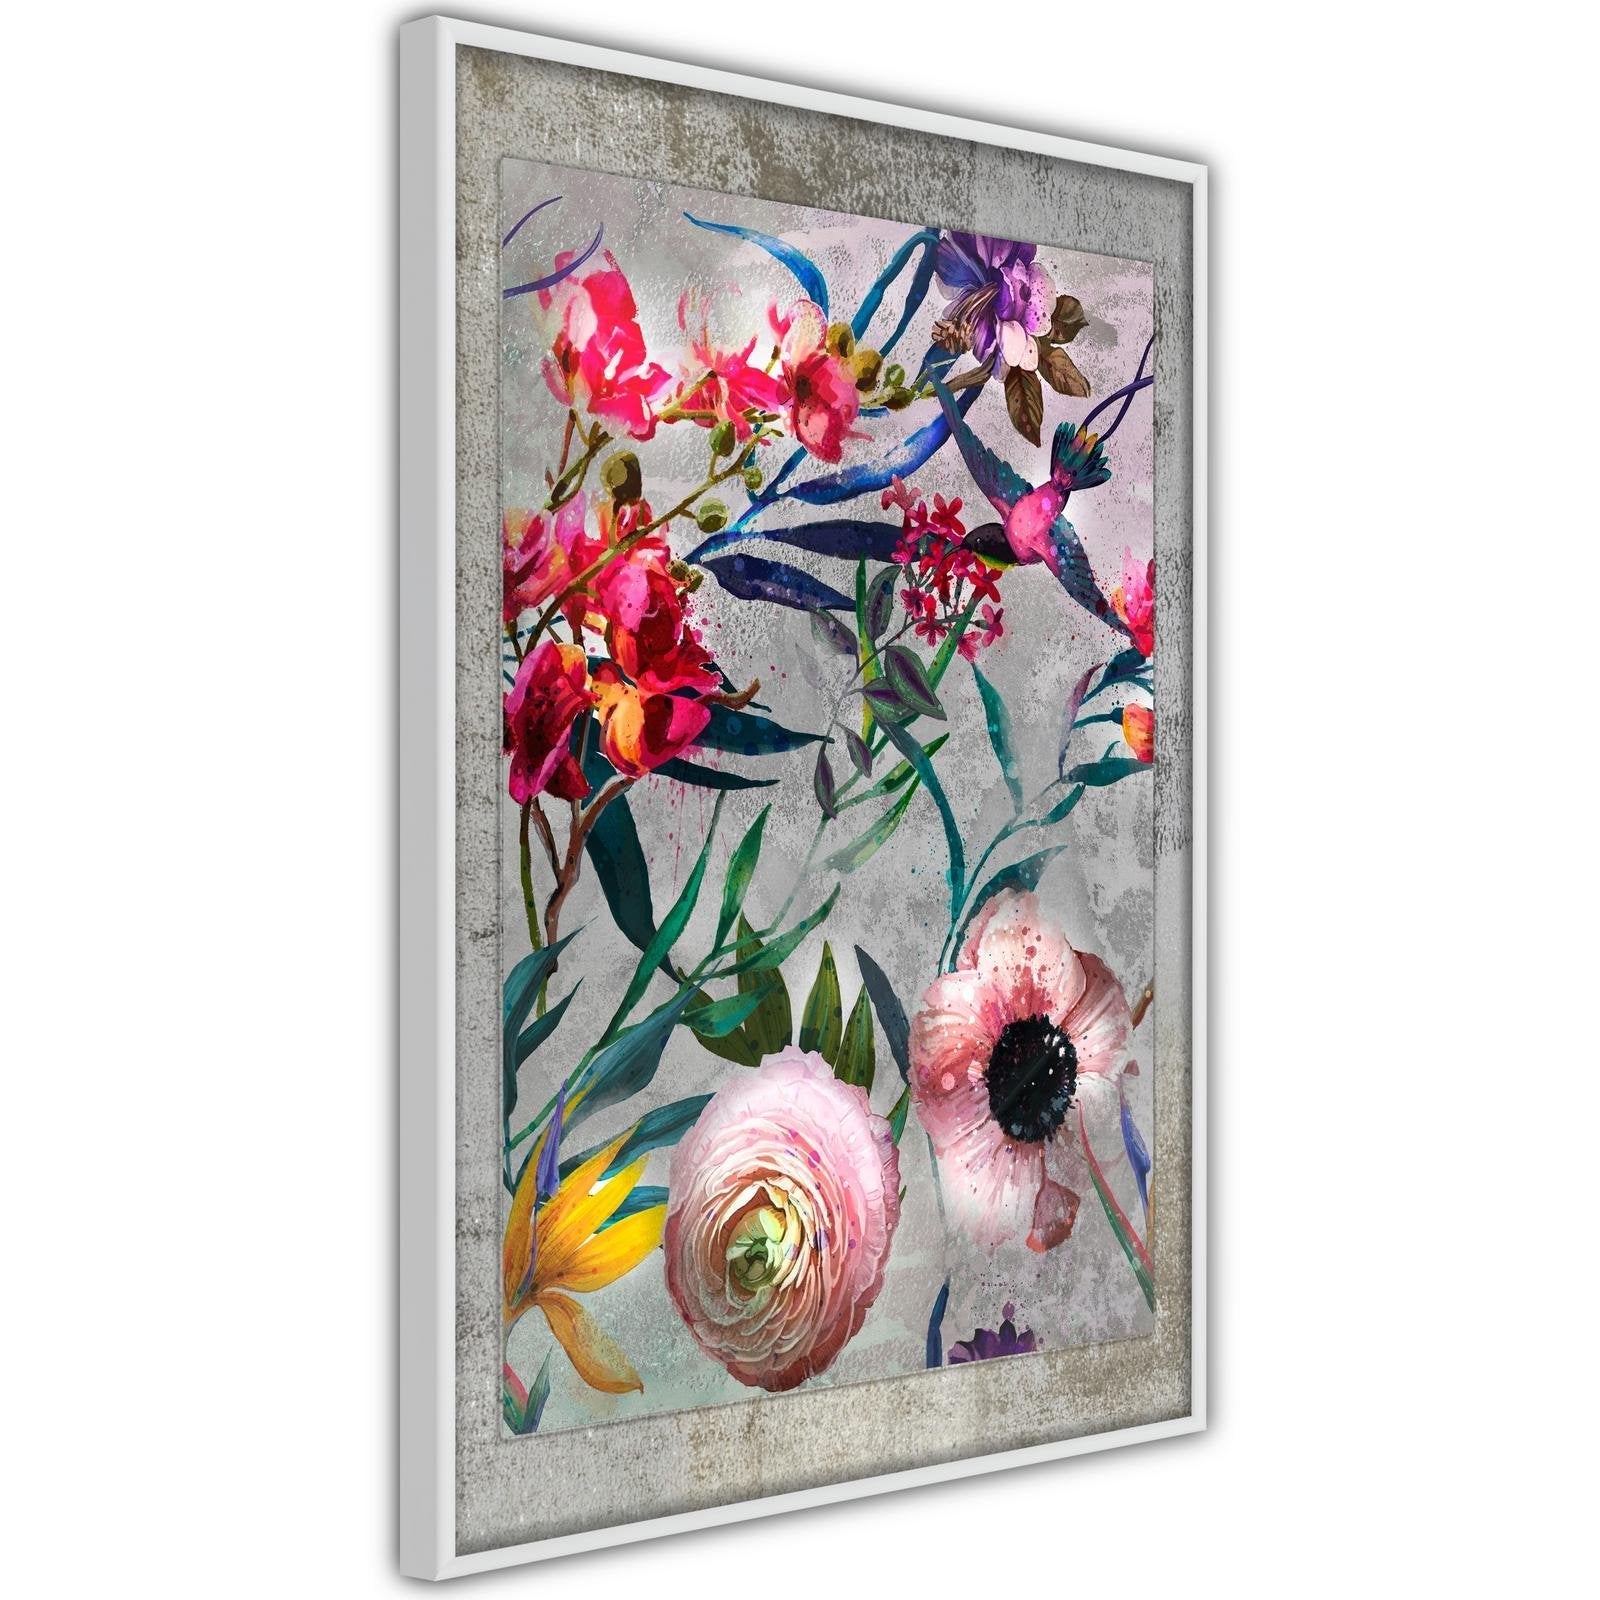 Inramad Poster / Tavla - Scattered Flowers-Poster Inramad-Artgeist-peaceofhome.se